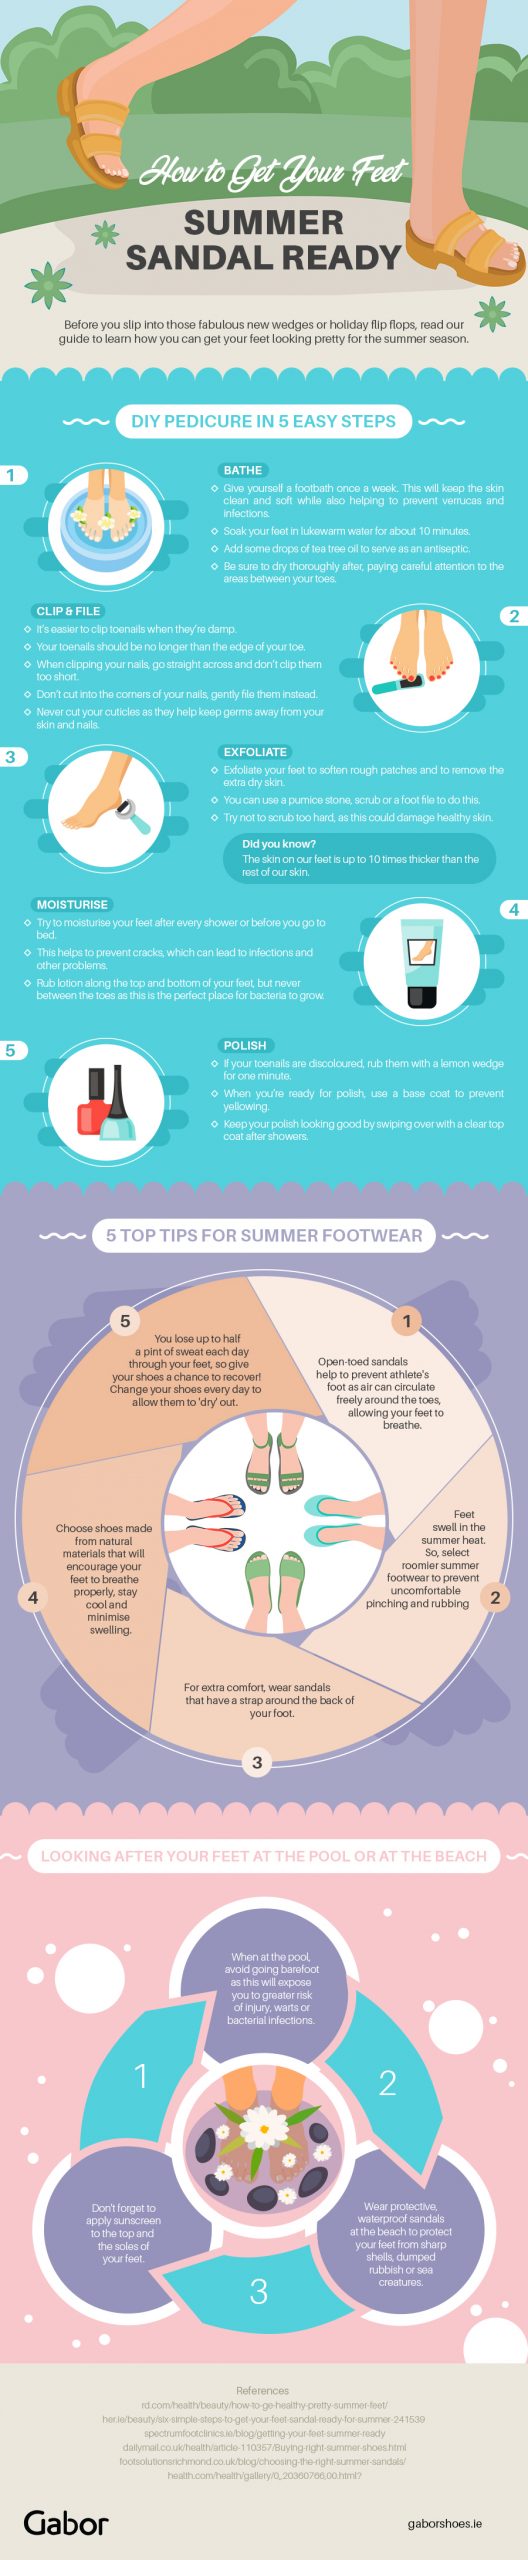 How to Get Your Feet Summer Sandal Ready
